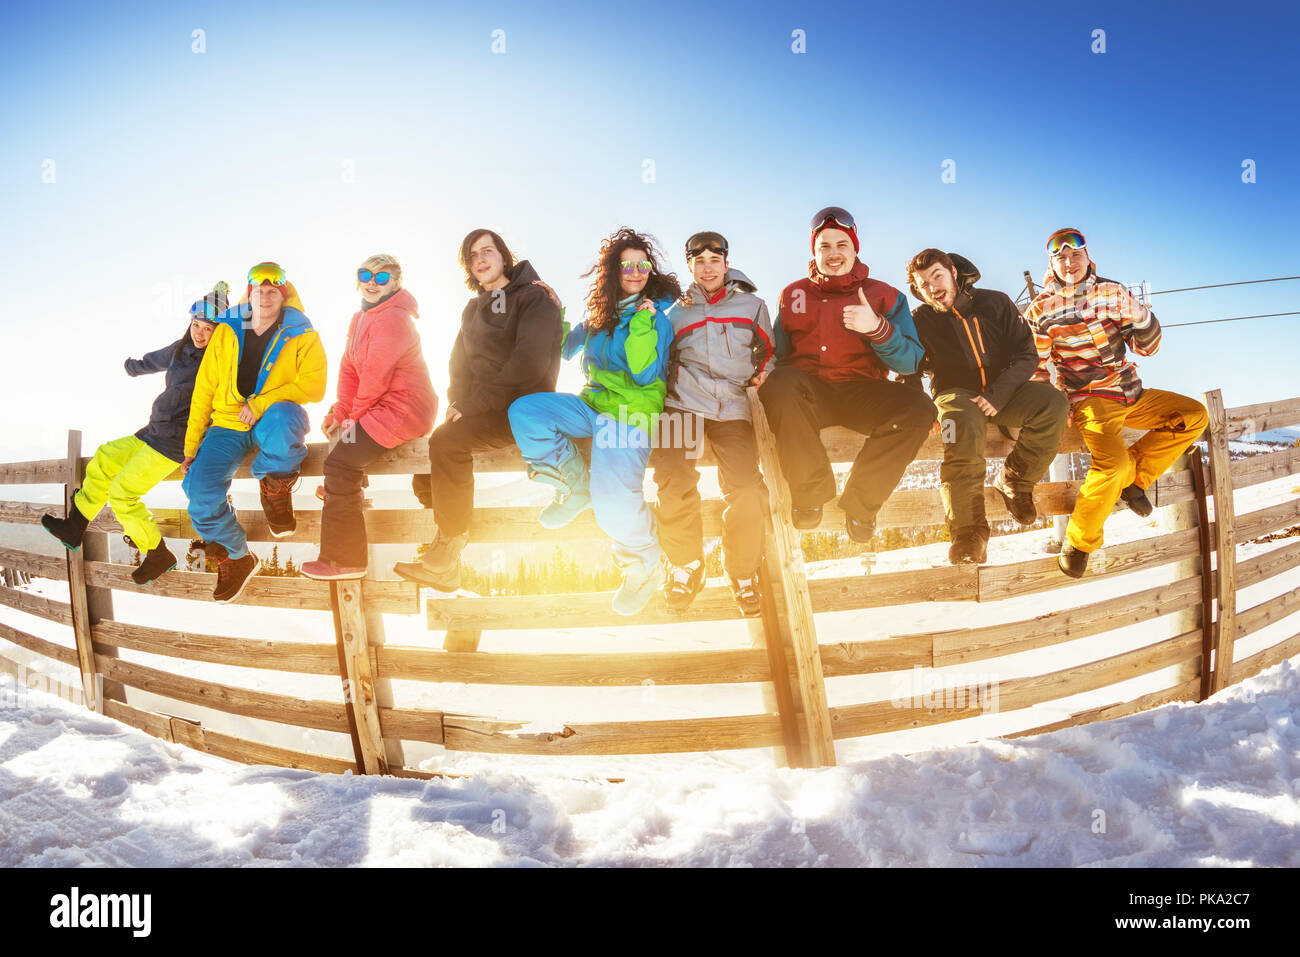 Group of friends at ski resort. Winter vacations concept with group of skiers and snowboarders Stock Photo